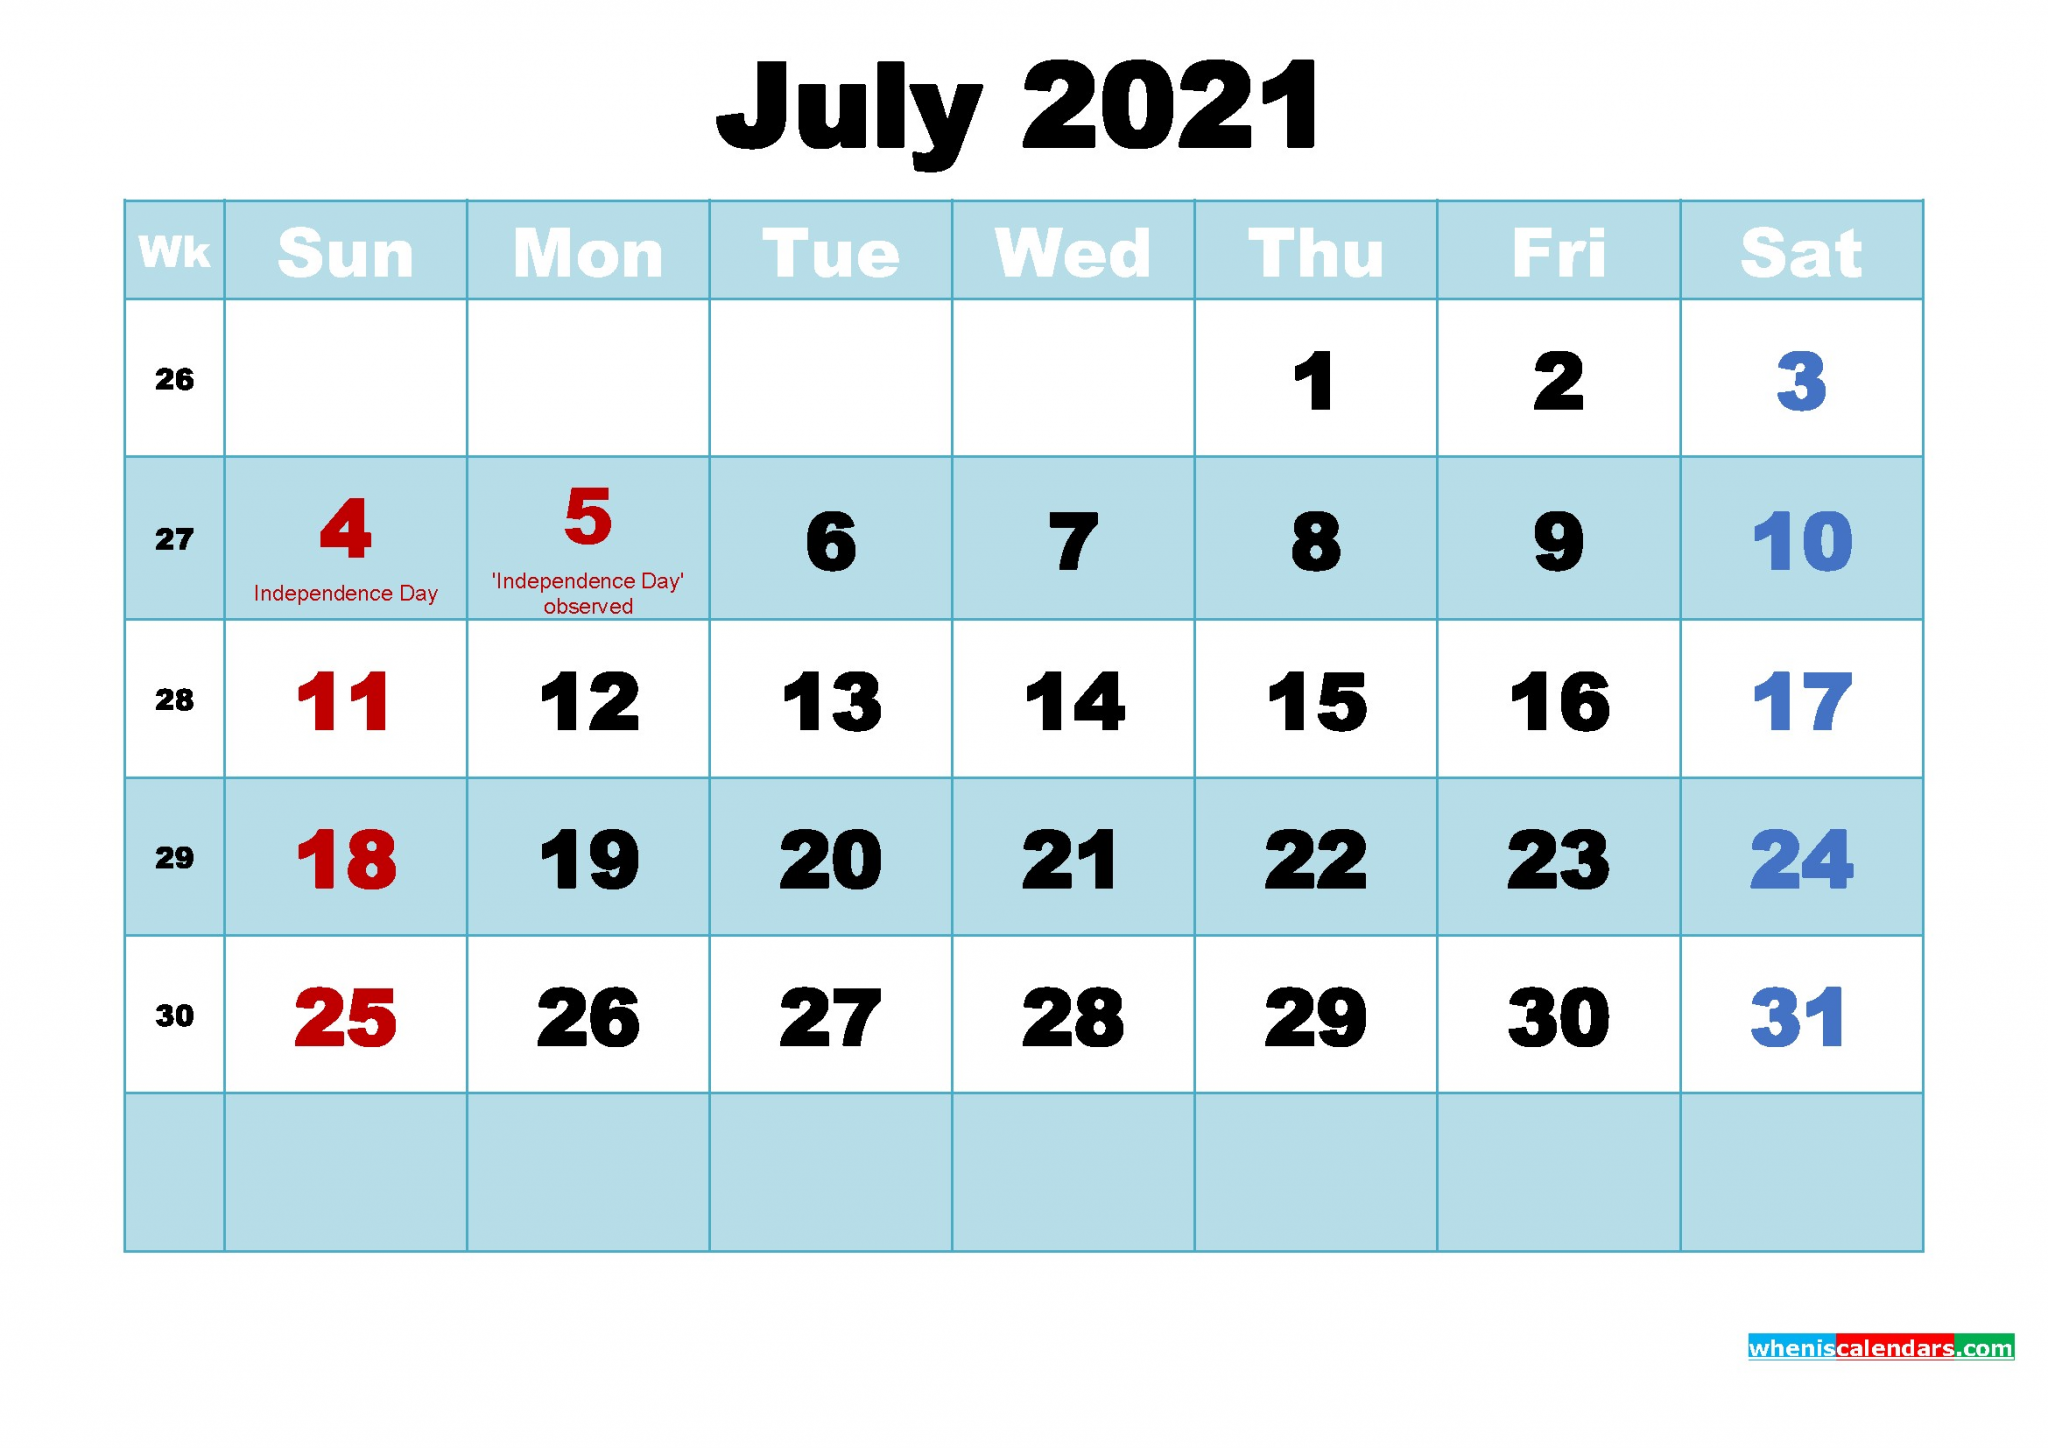 July 2021 Calendar with Holidays Free Printable July 2021 Calendar with Holidays as Word